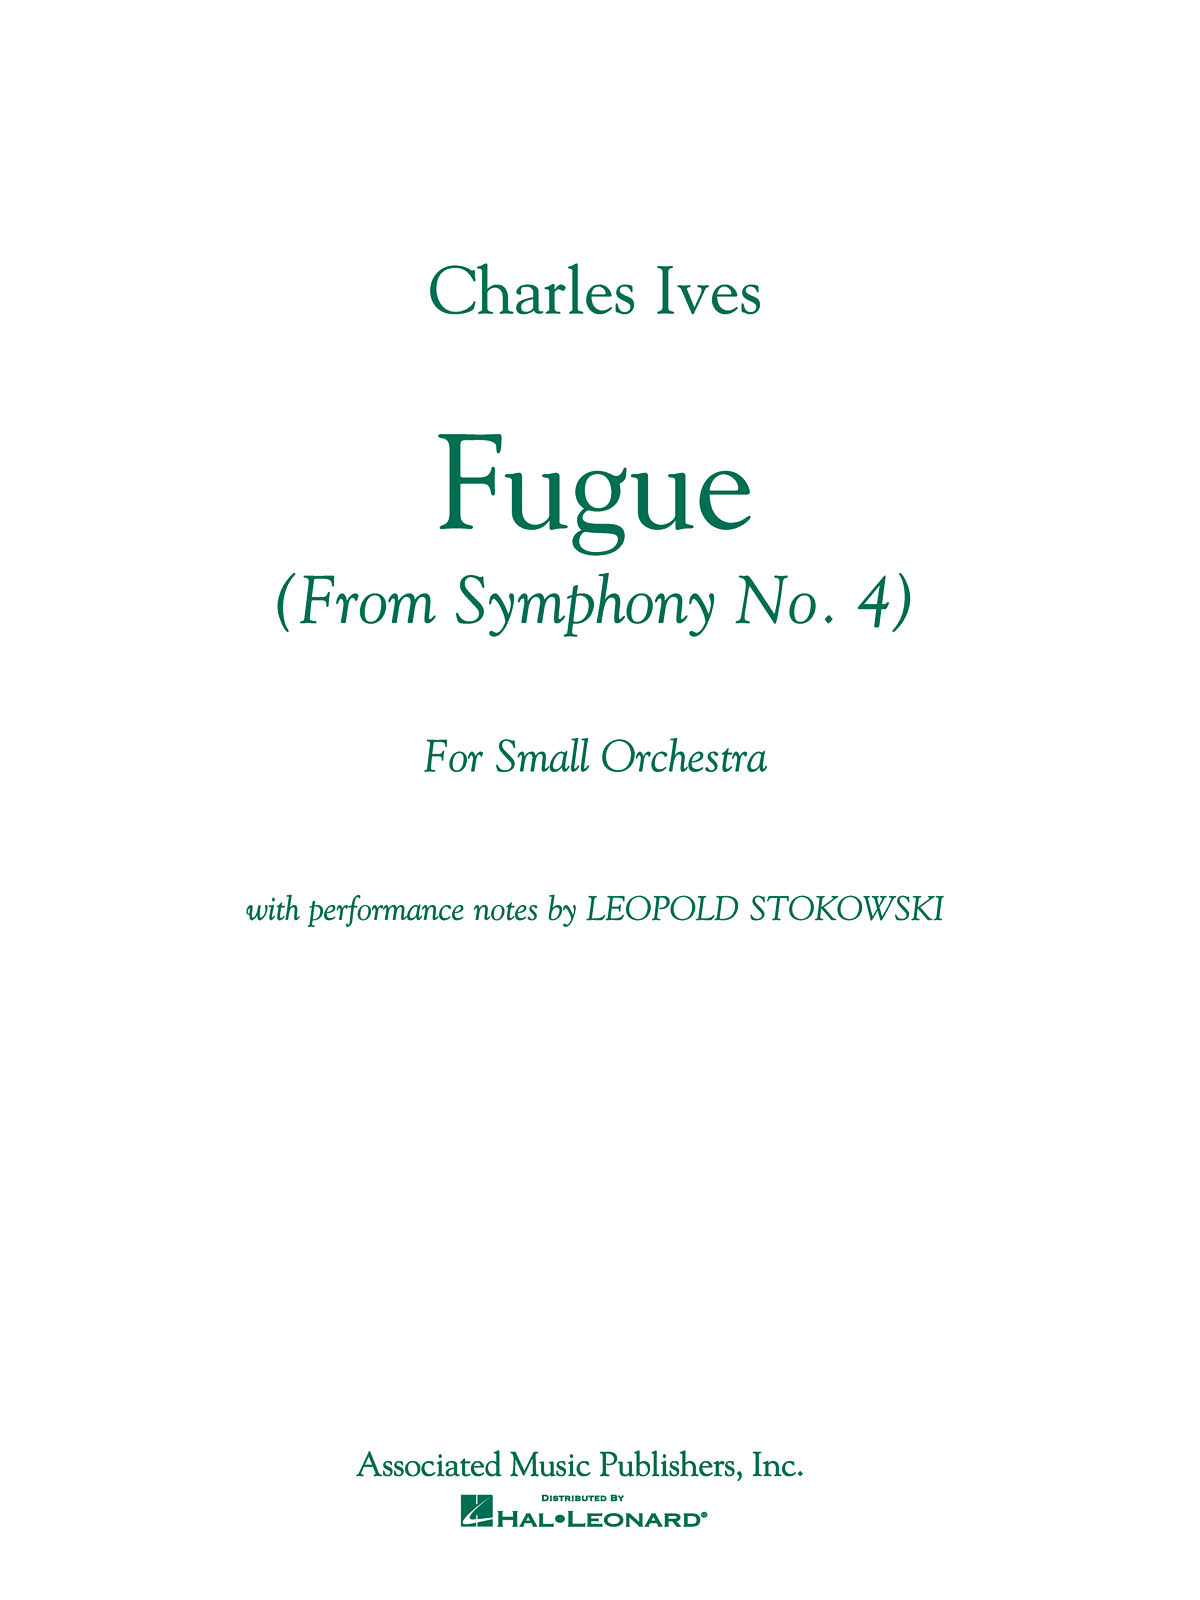 Charles Ives: Fugue (From Symphony No. 4)